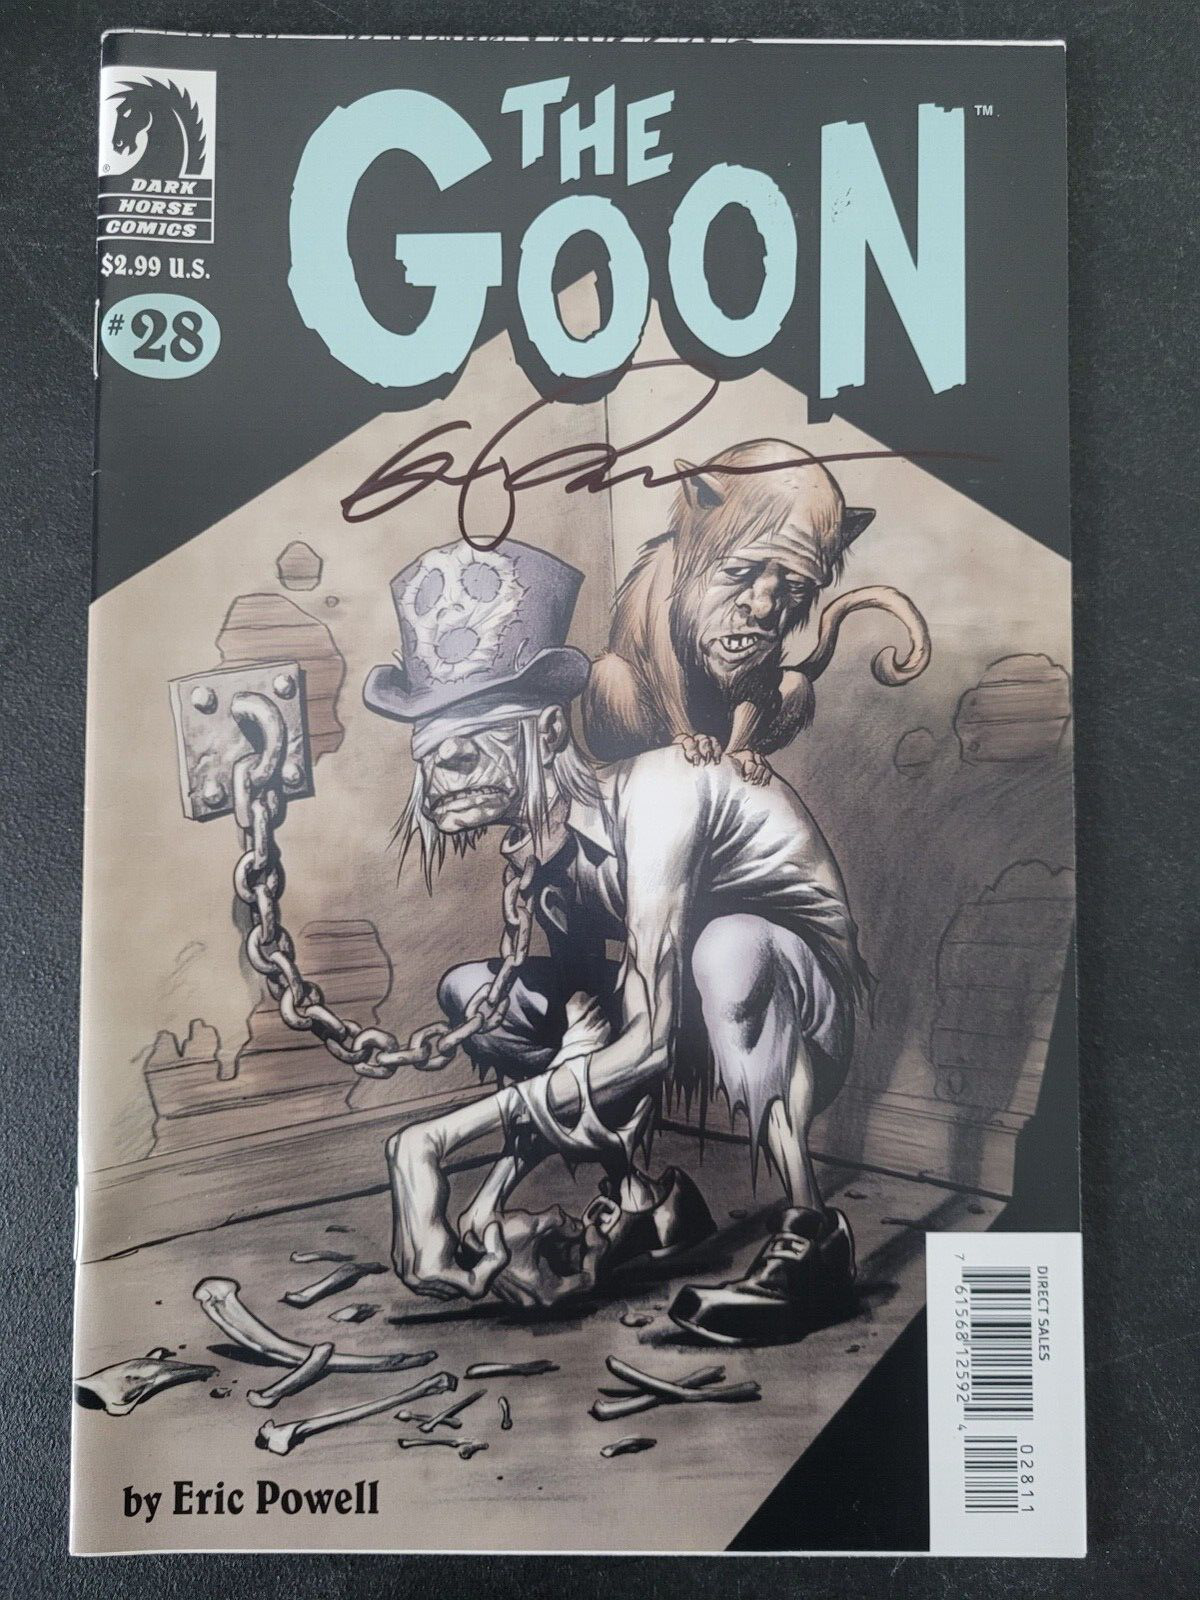 THE GOON #28 (2008) DARK HORSE COMICS AUTOGRAPHED/SIGNED By ERIC POWELL